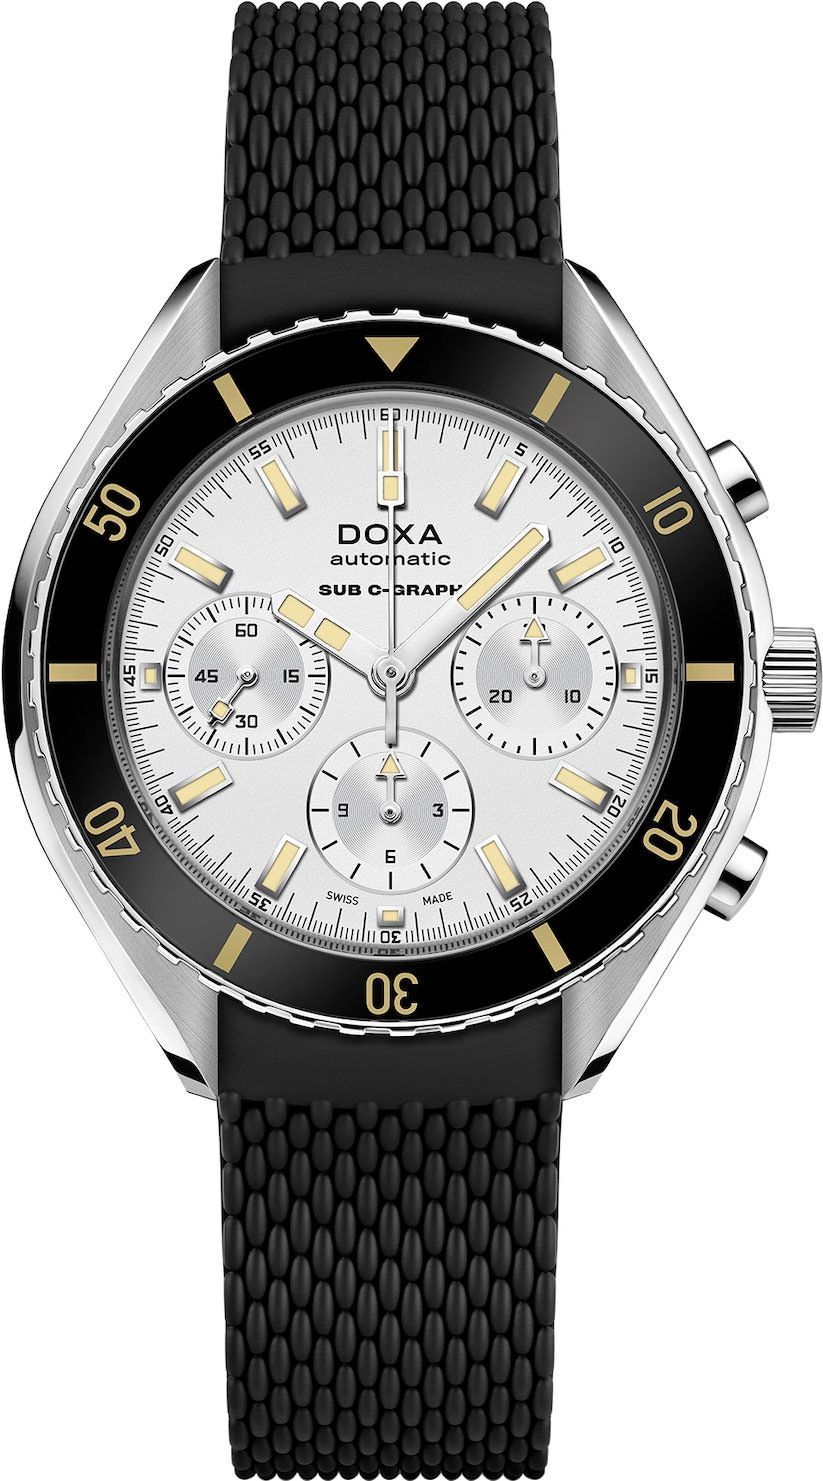 Doxa SUB 200 C-GRAPH Searambler Silver Dial 45 mm Automatic Watch For Men - 1